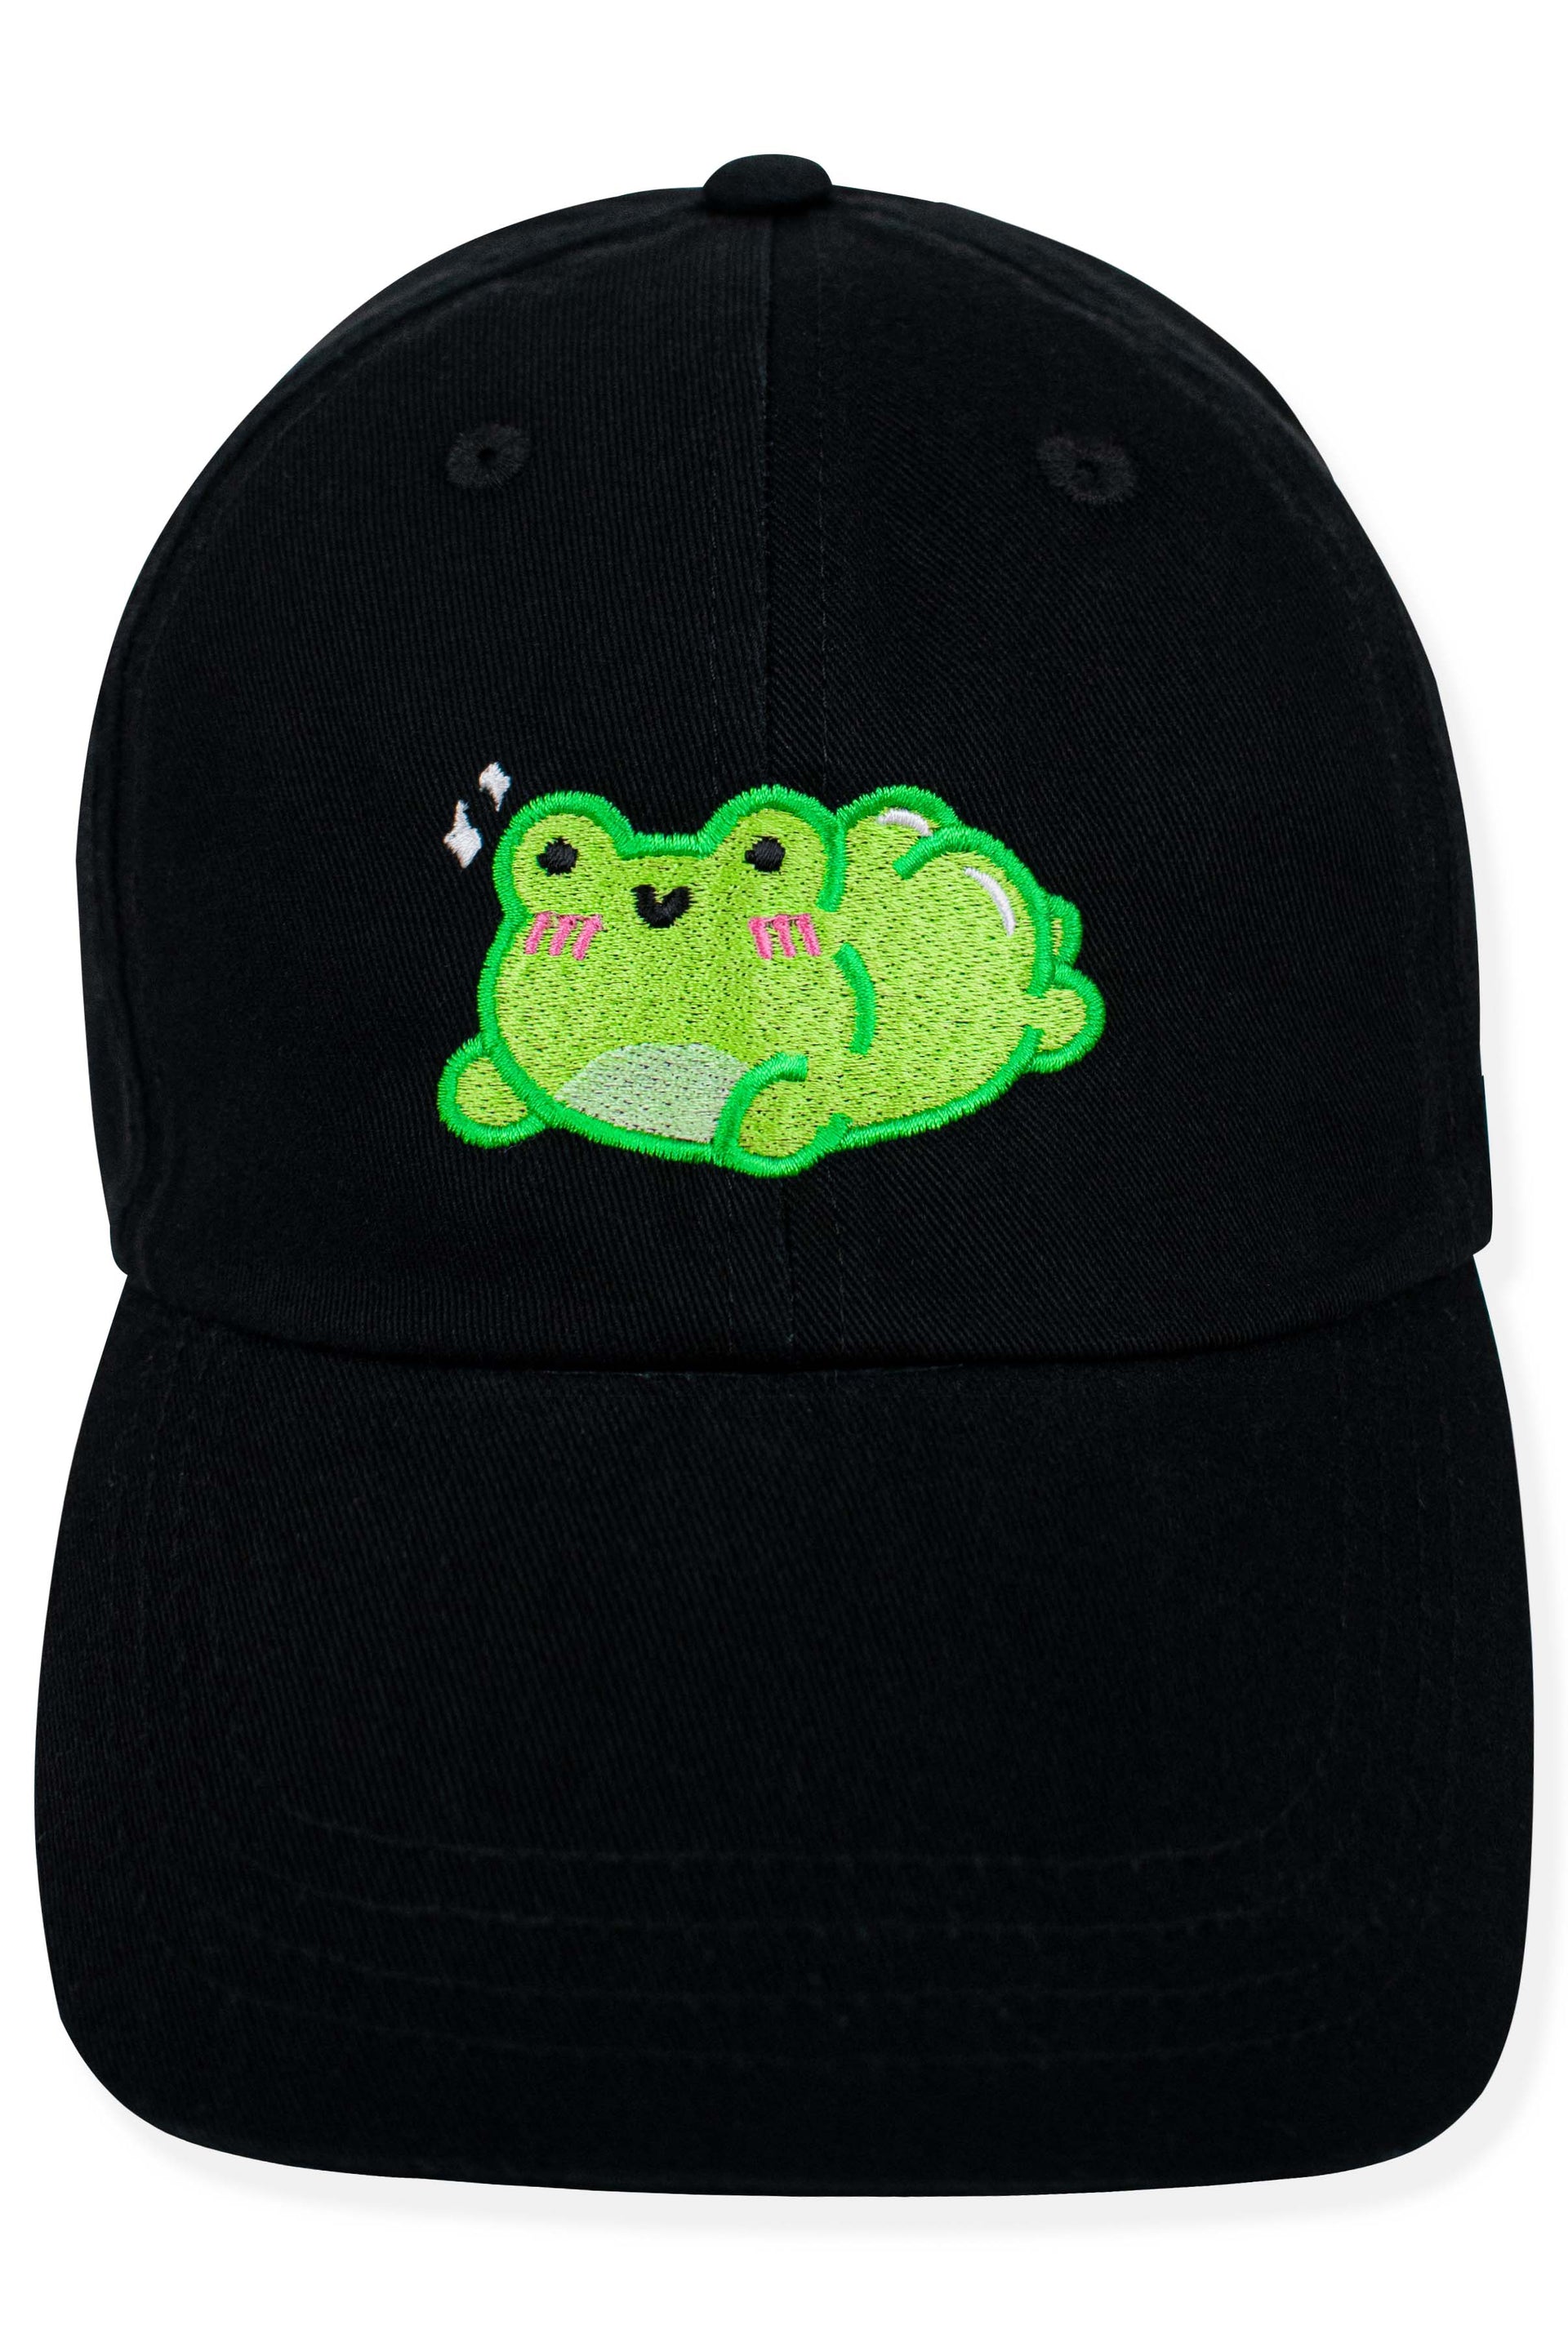 Thicc Albert The Frog Embroidered Cap - Momokakkoii